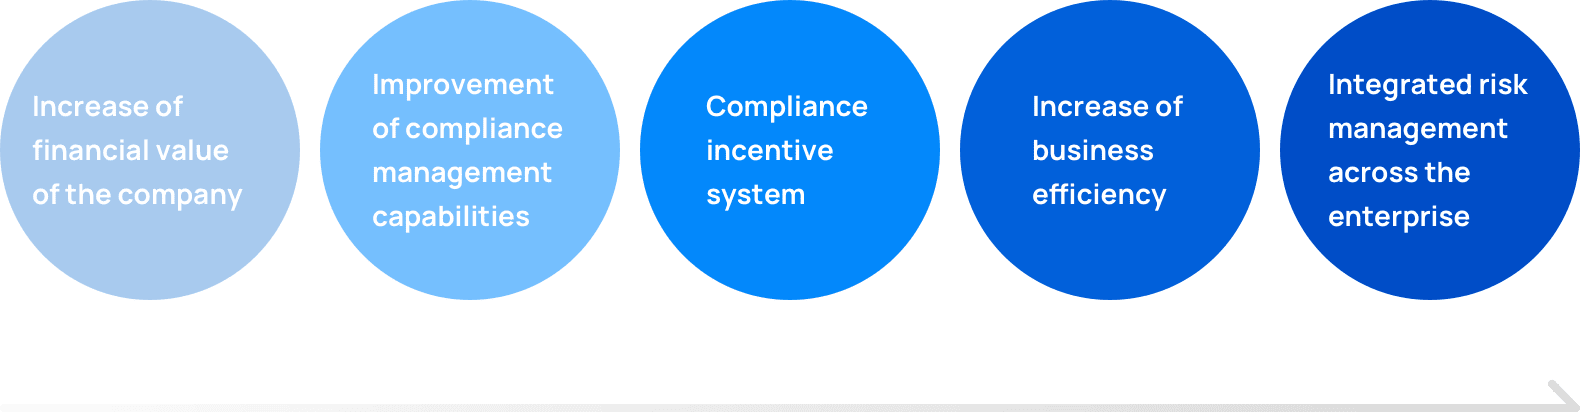 Increase of financial value of the company, Improvement of compliance management capabilities, Compliance incentive system, Increase of business efficiency, Integrated risk management across the enterprise